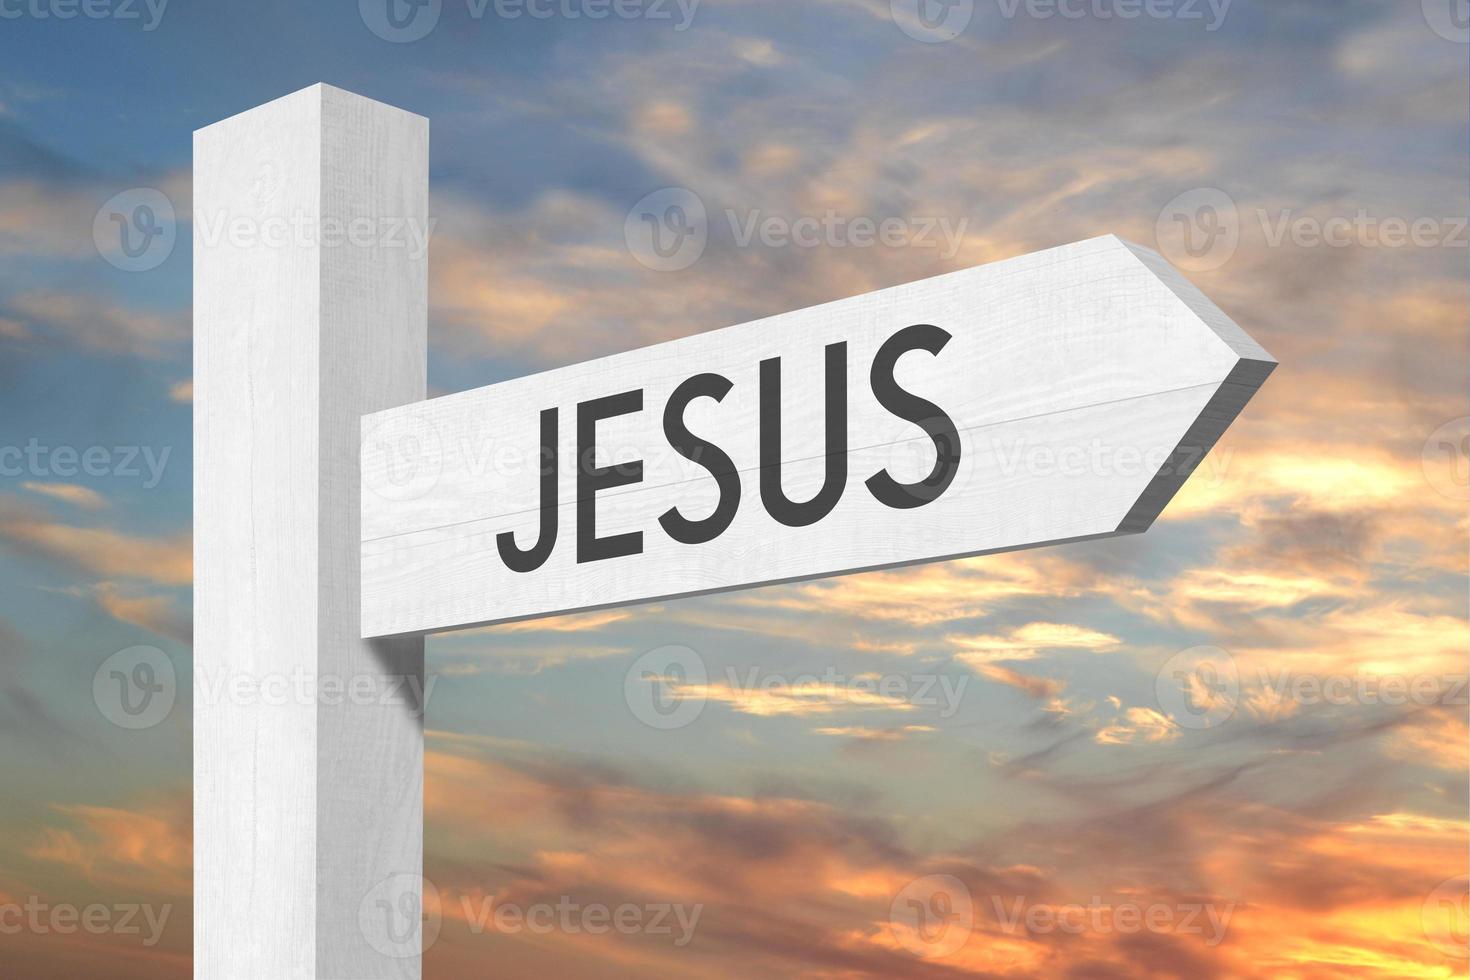 Jesus - White Wooden Signpost with one Arrow and Sunset Sky in Background photo